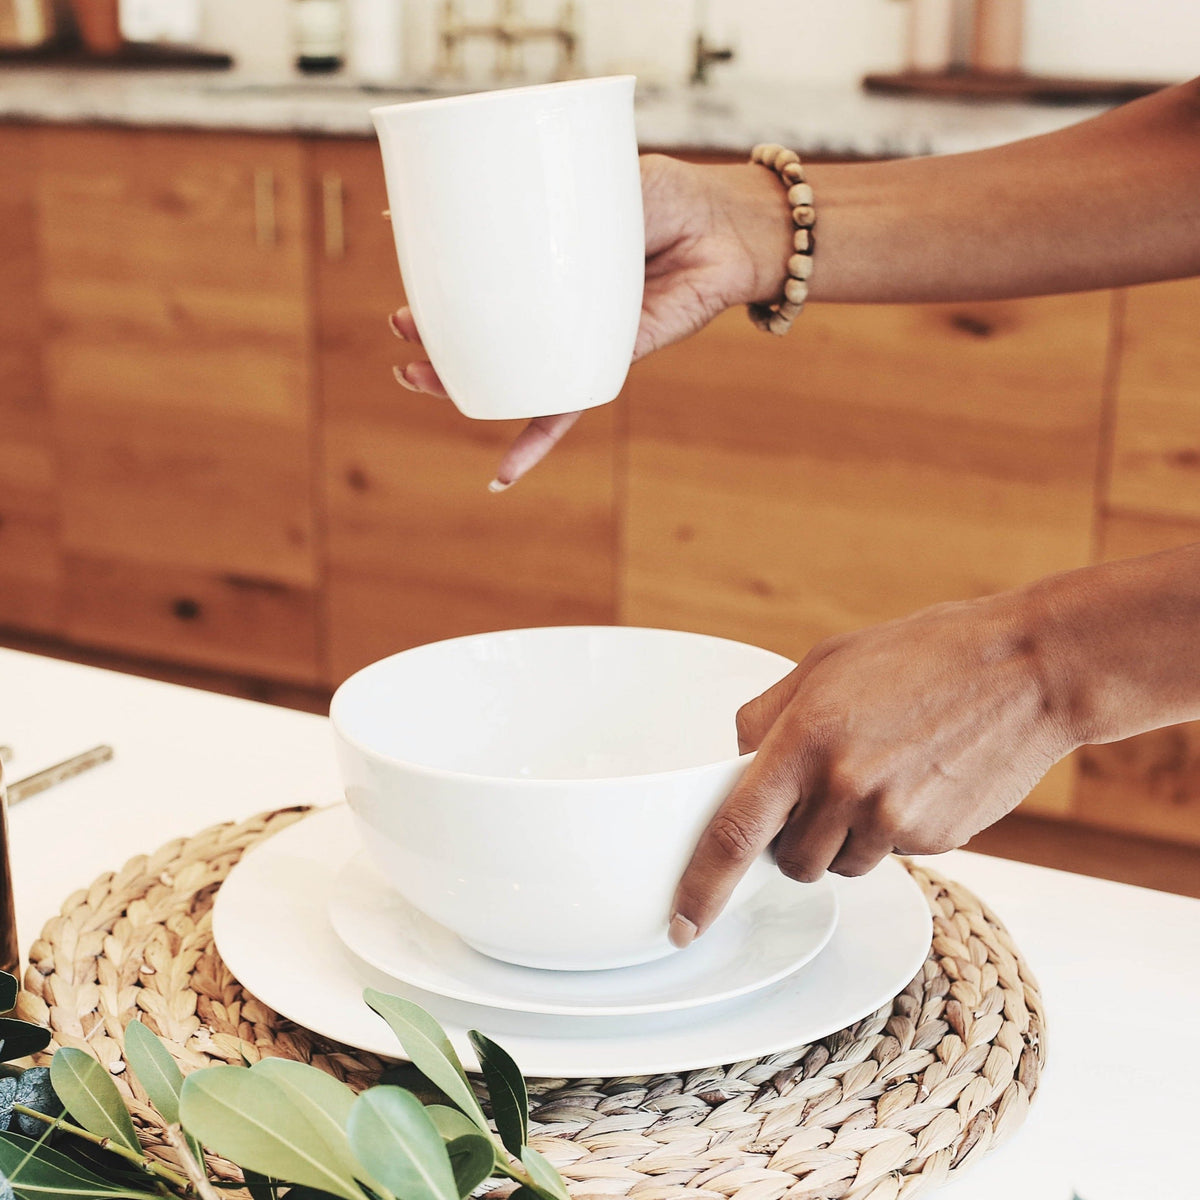 Lifestyle, woman places a white porcelain coffee mug onto a beautifully decorated dining room table complete with stacked white porcelain bowl and plates.